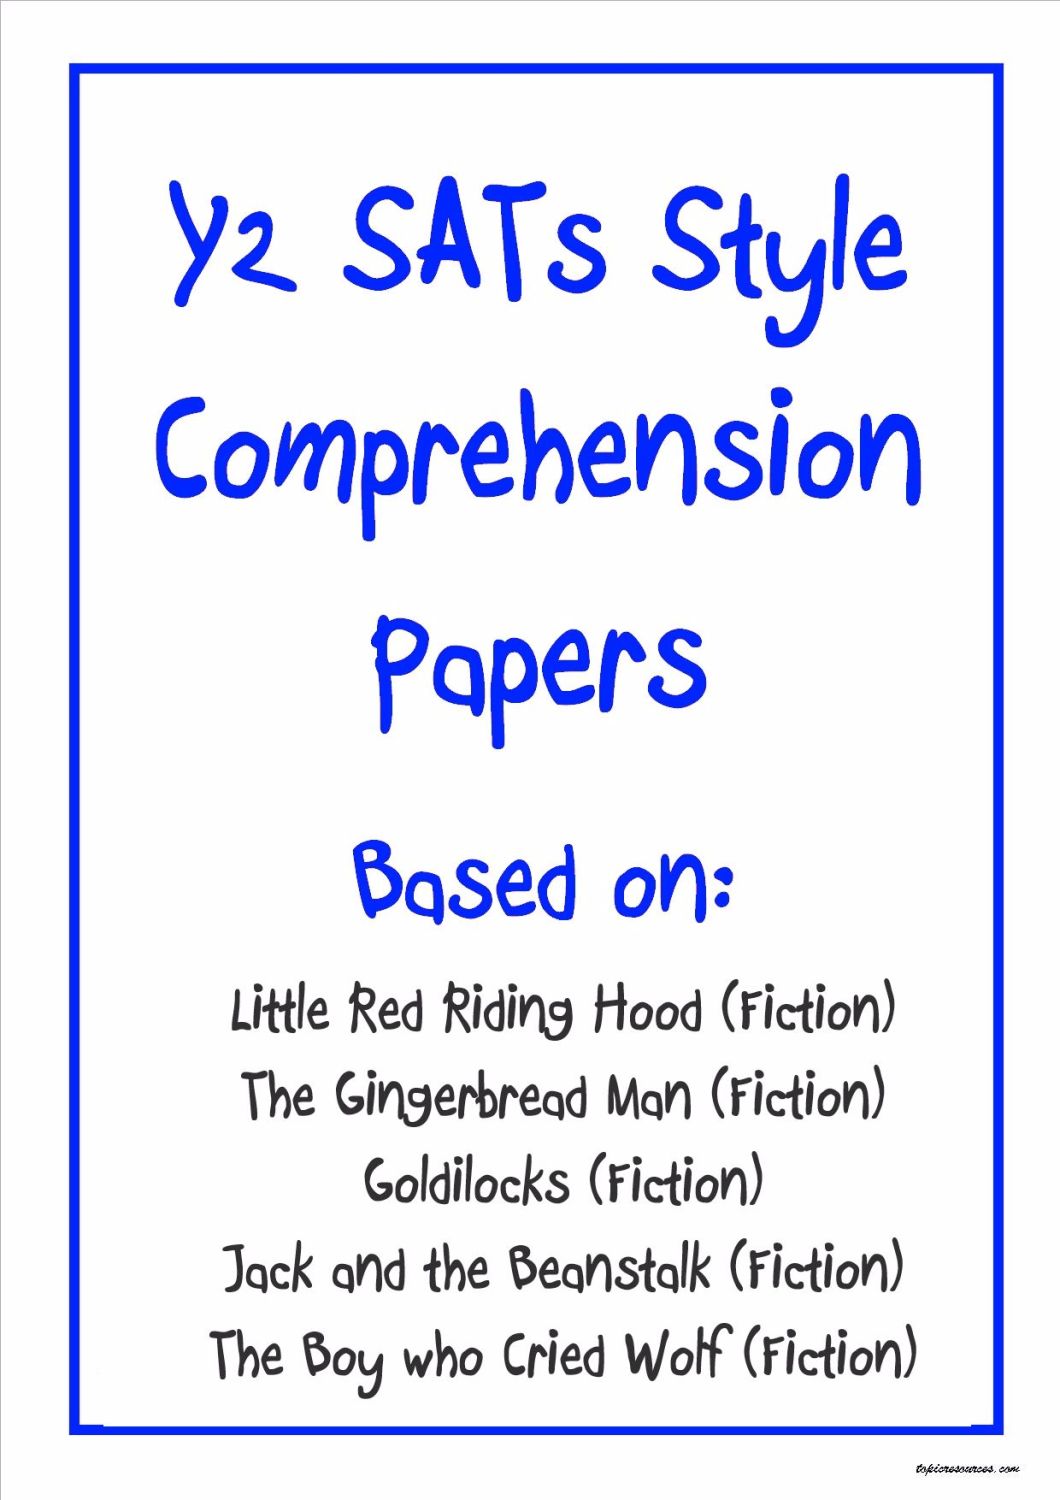 Y2 SATs-style comprehension papers based on traditional tales.